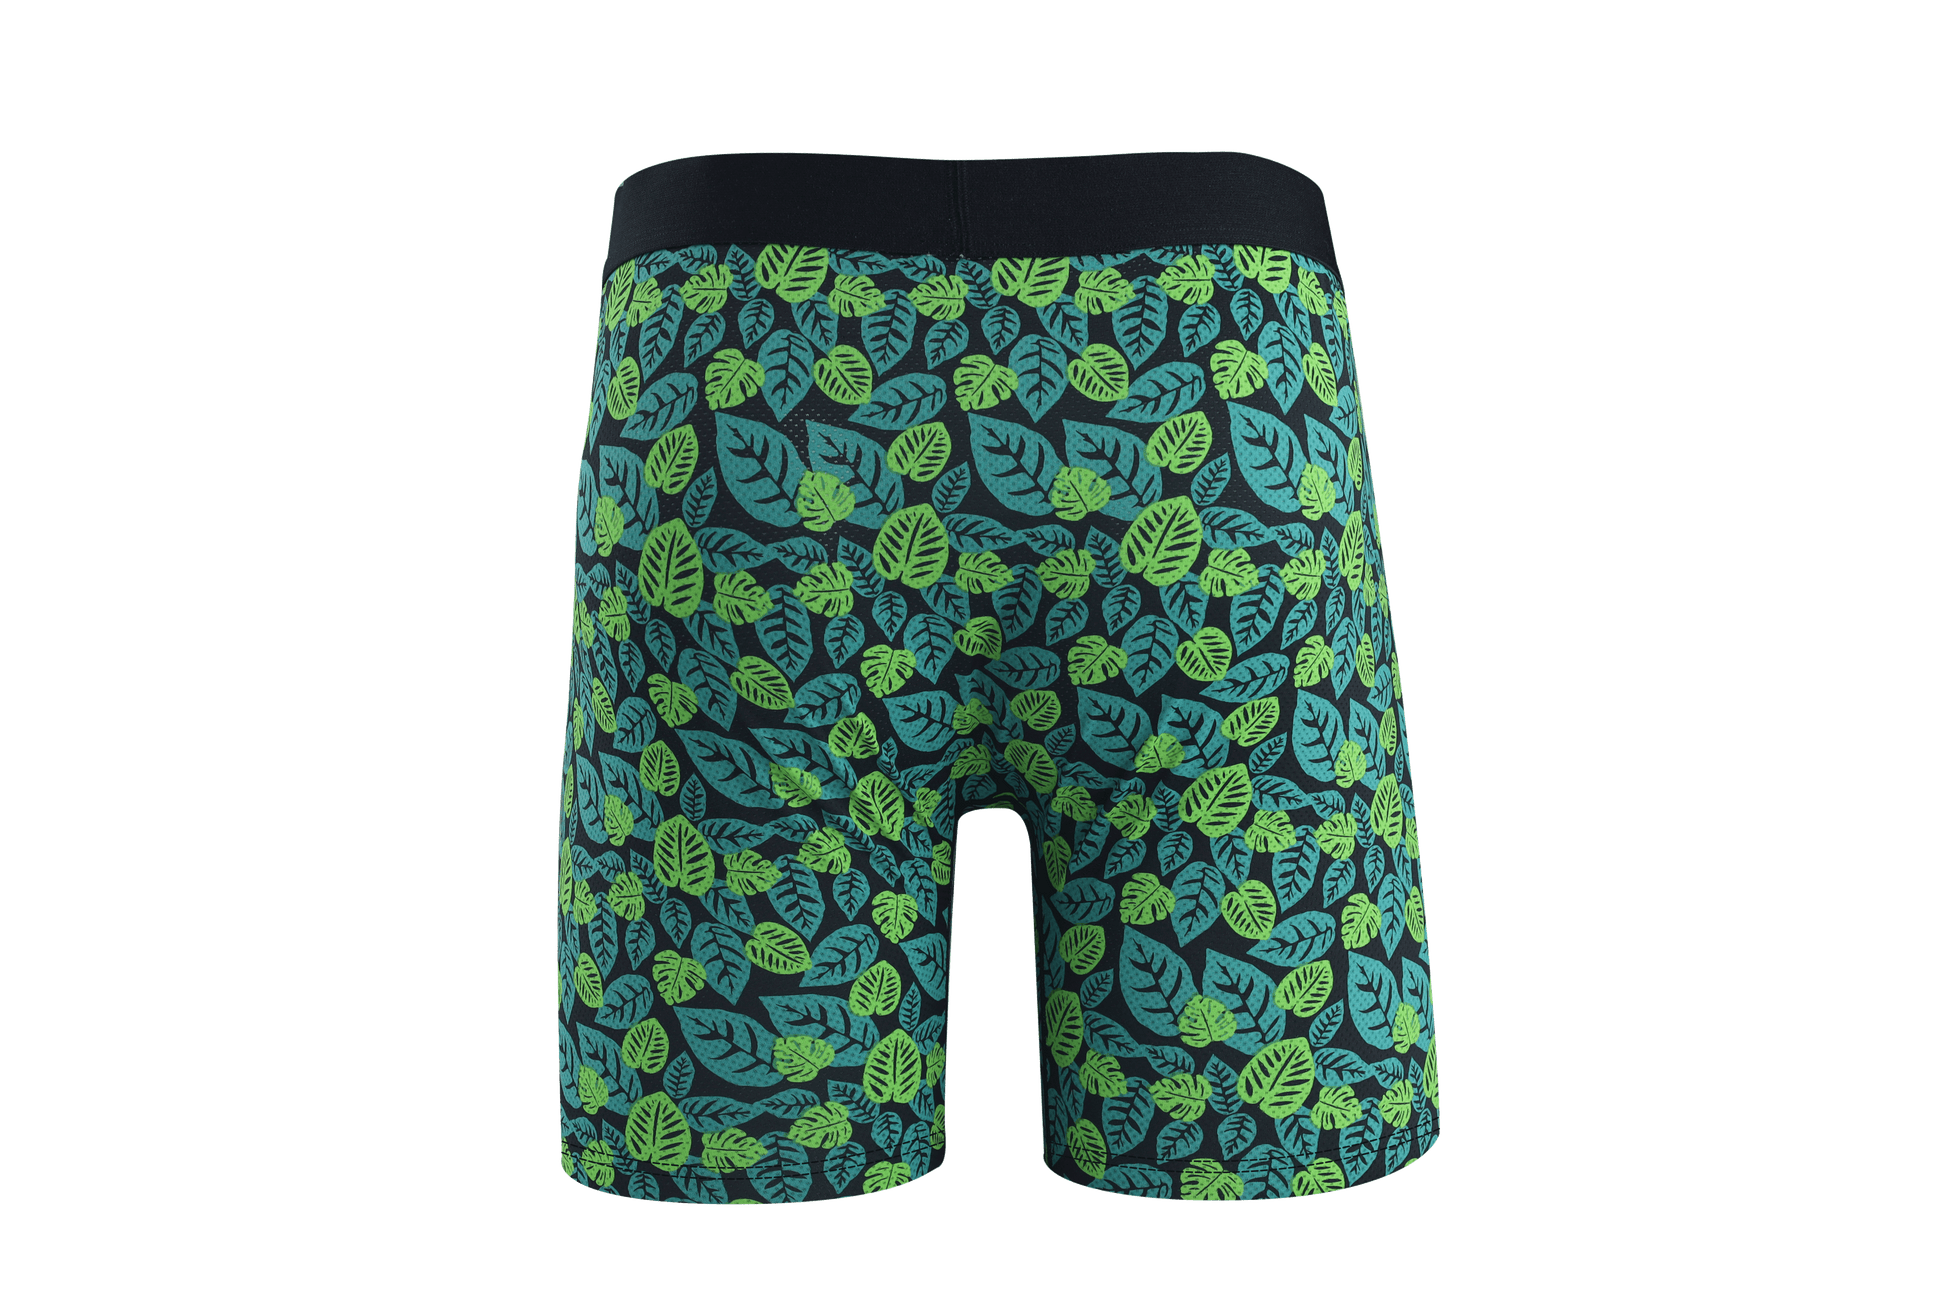 Youth All Seeing Eye Printed Boxer Shorts, Mens Sports Underwear